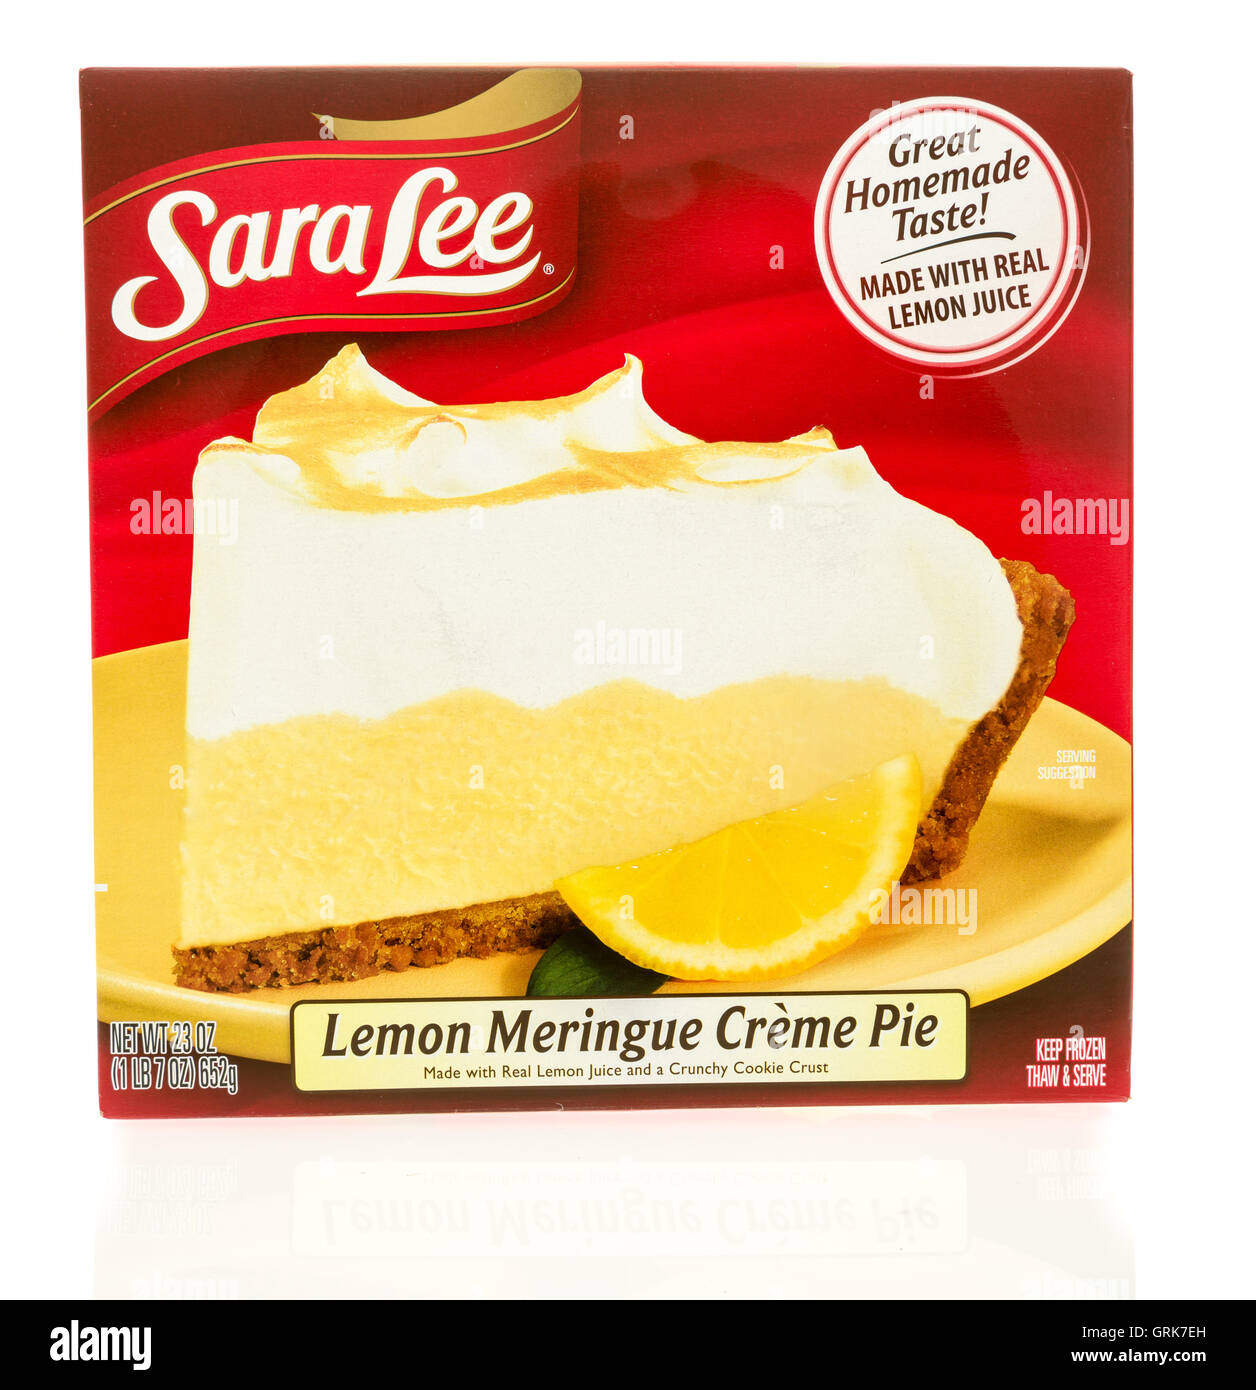 Winneconne, WI - 1 August 2016: Package of Sara lee lemon meringue creme  pie on an isolated background Stock Photo - Alamy